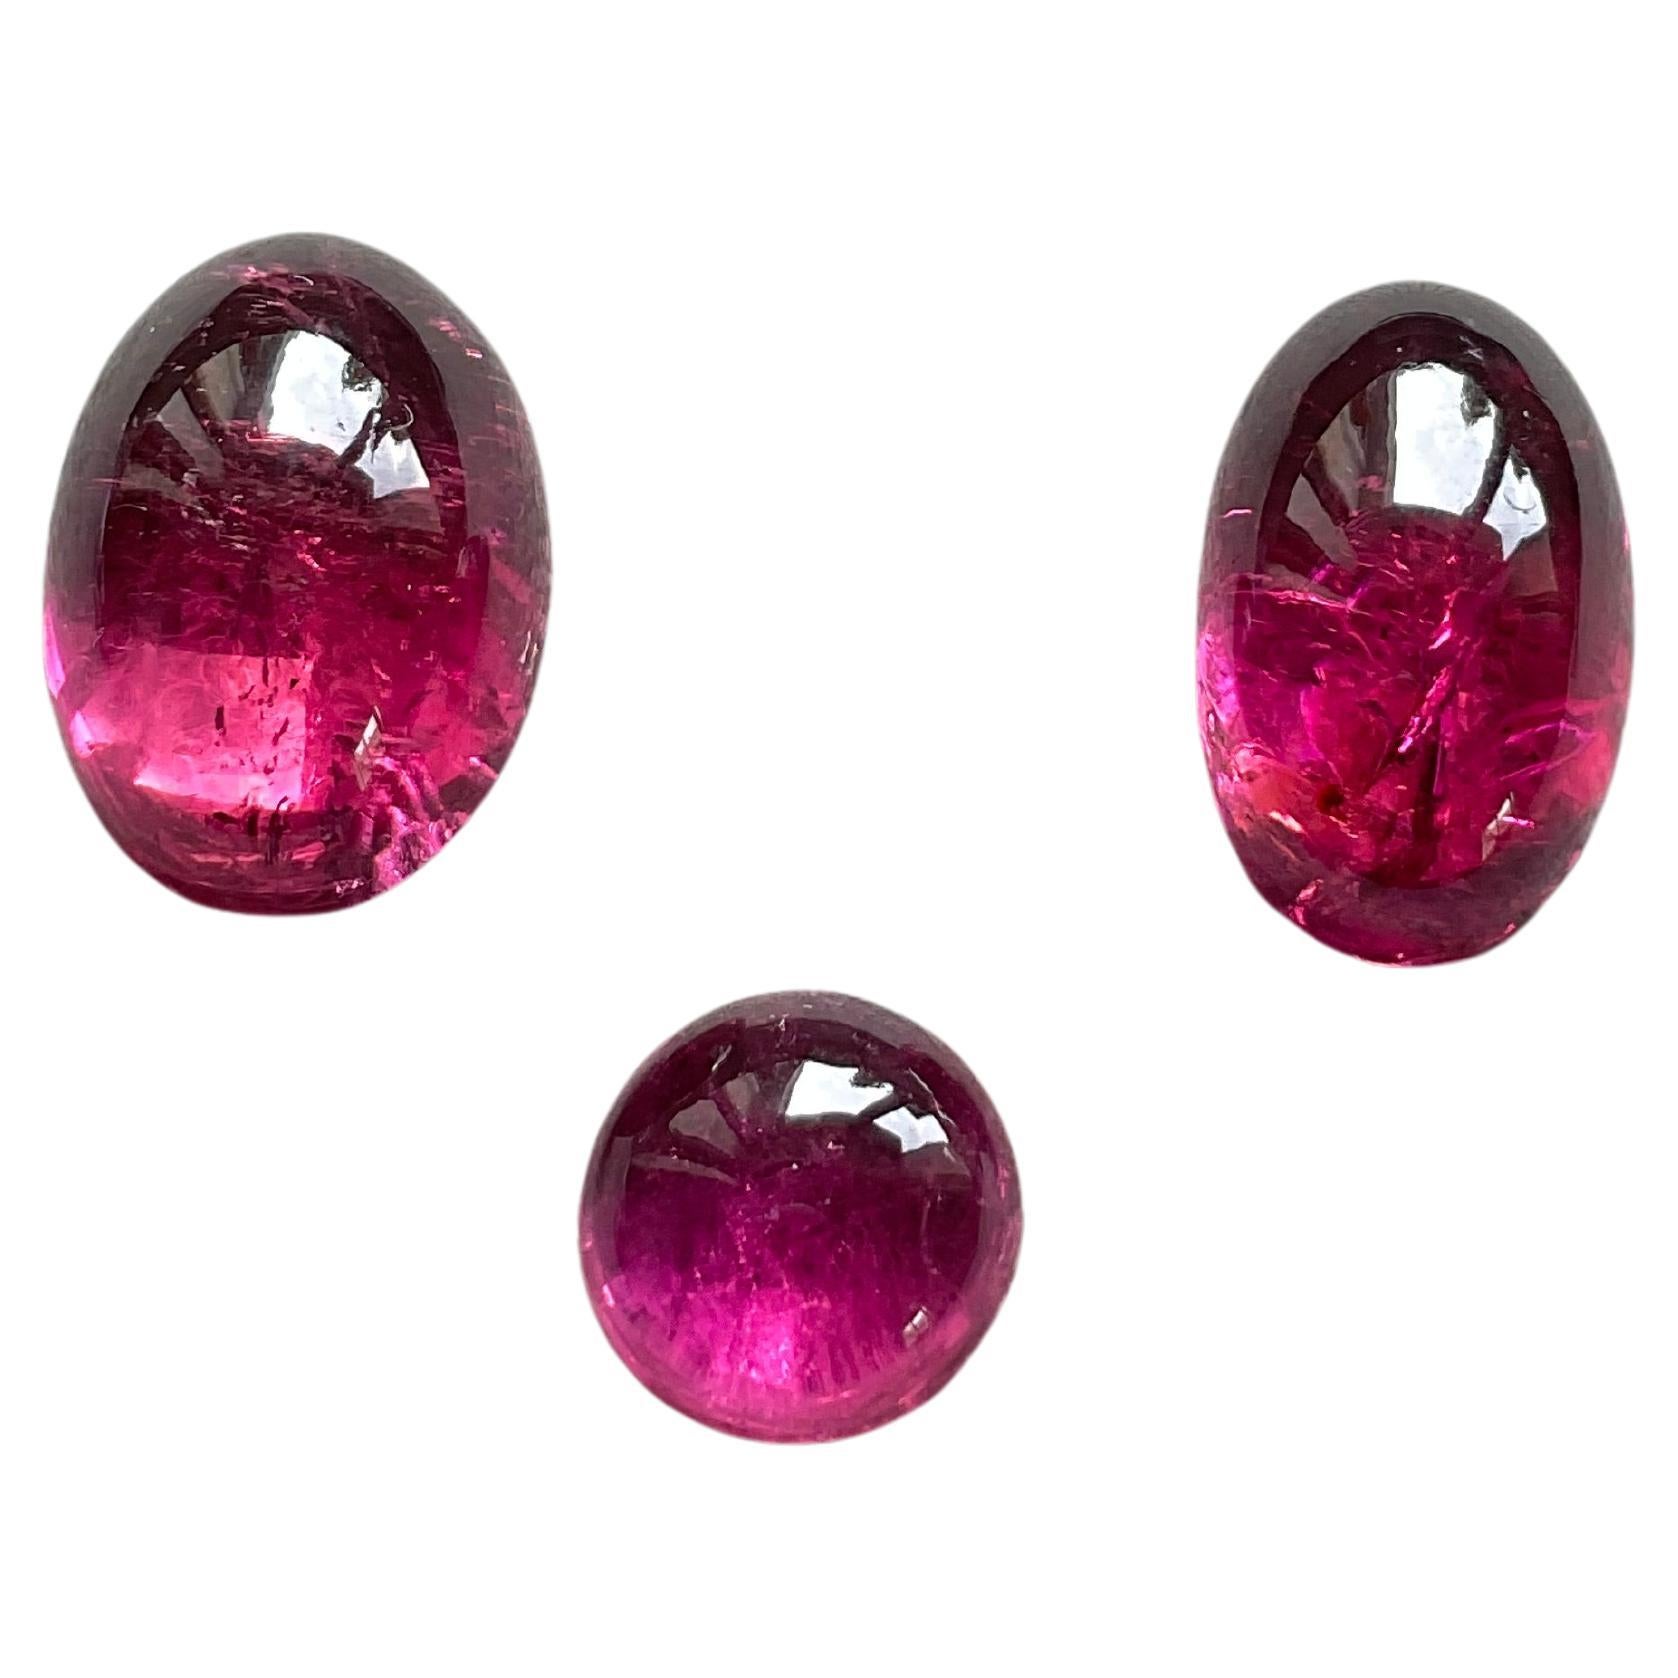 25.21 Carats Top Quality Rubellite Tourmaline Cabochon 3 Pieces Natural Gemstone For Sale